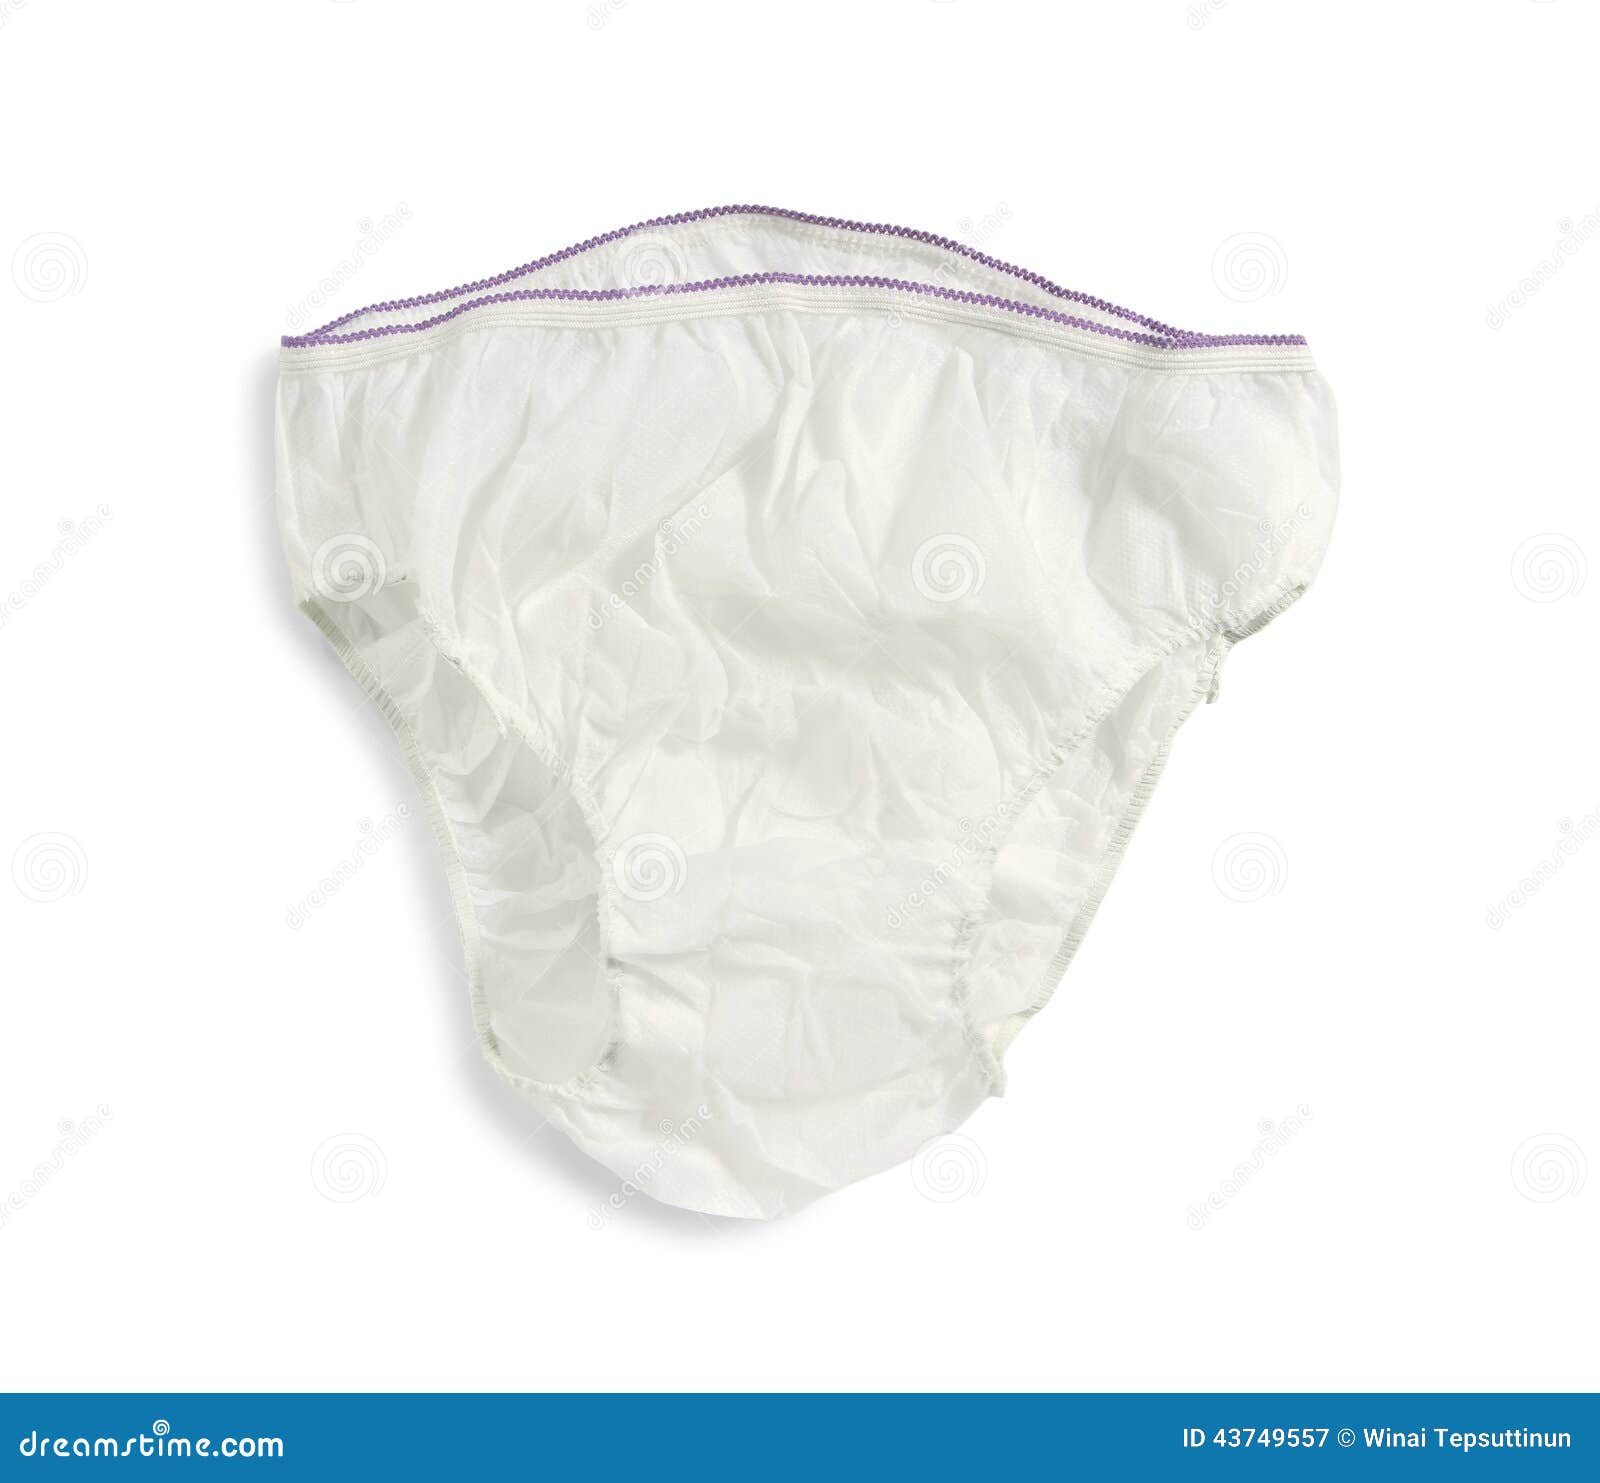 Disposable underwear stock image. Image of object, underwear